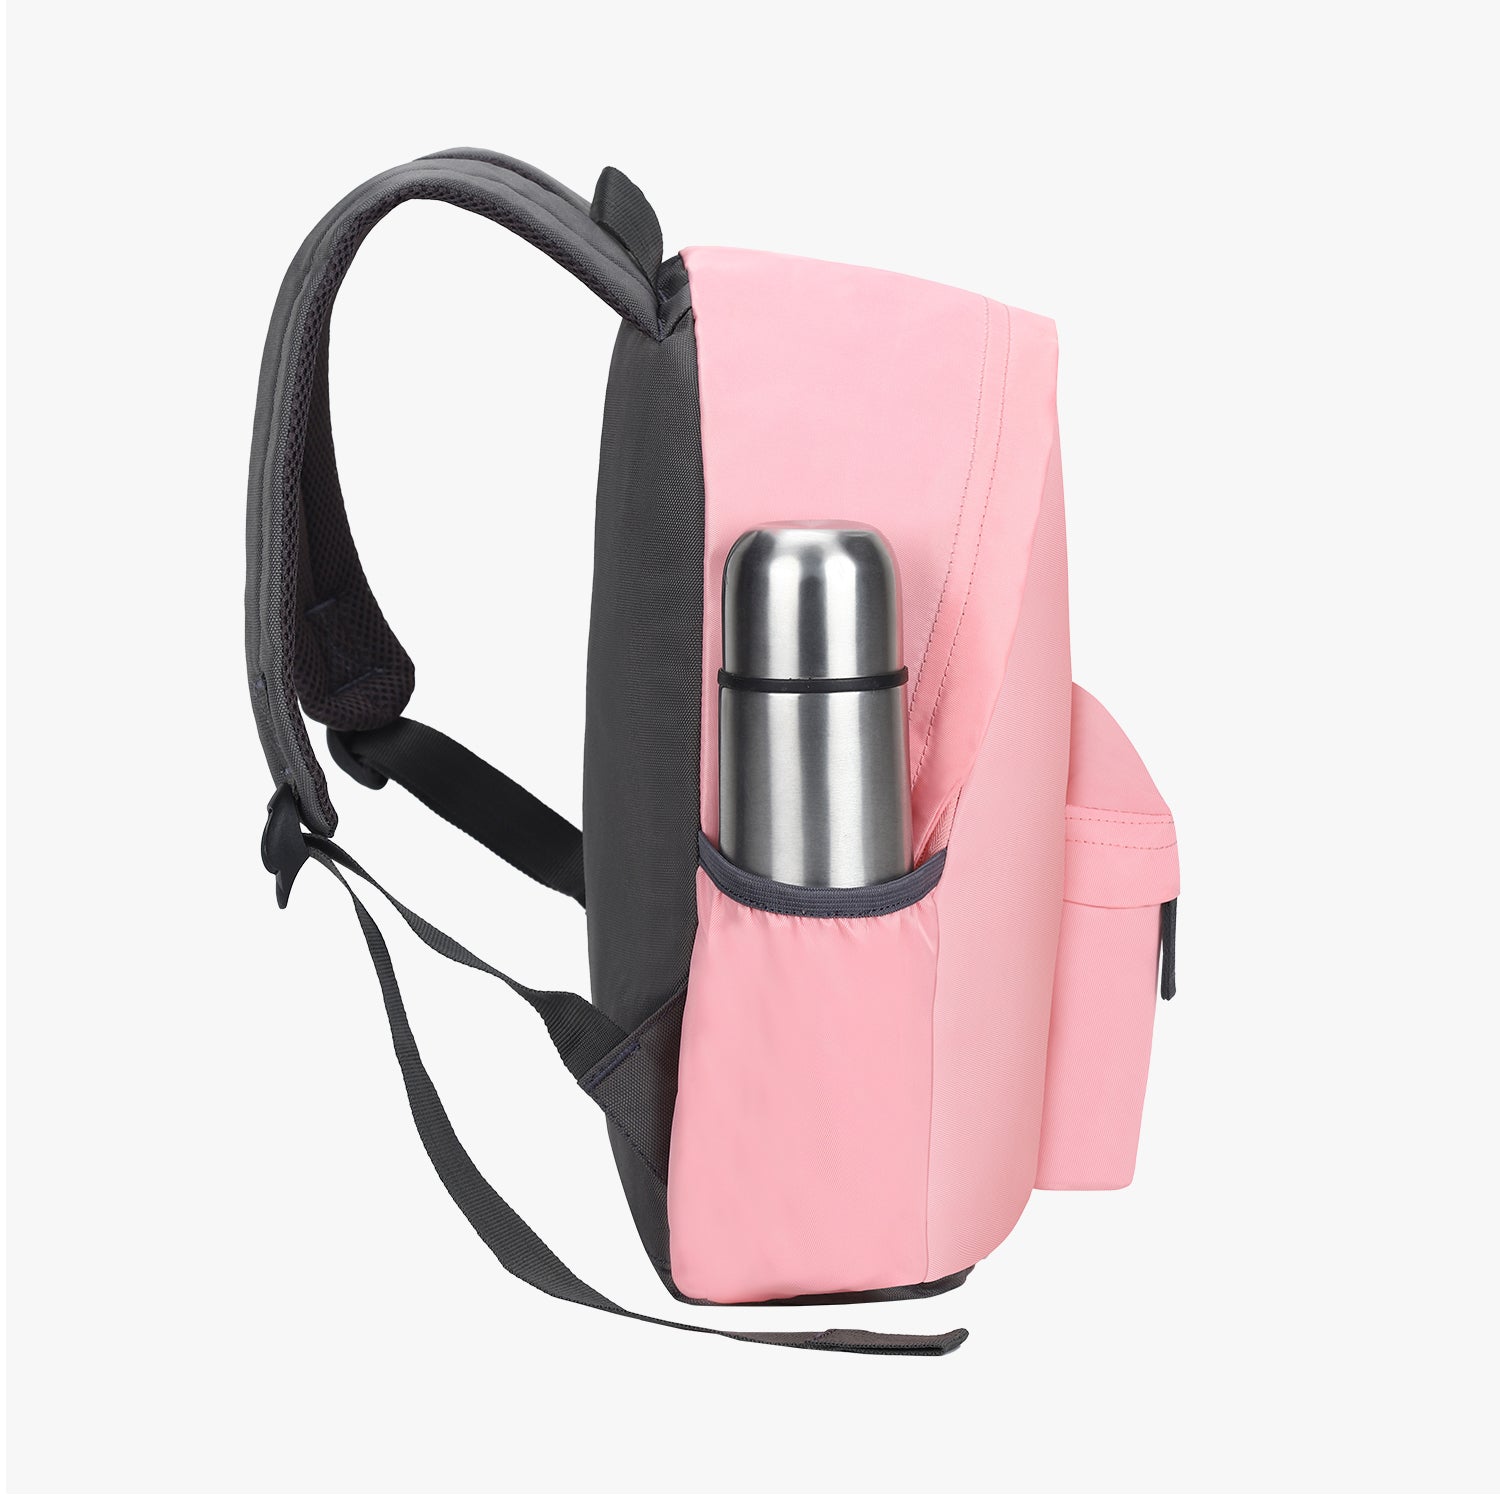 Genie Candy 13.5L Pink Small Backpack With Easy Access Pockets